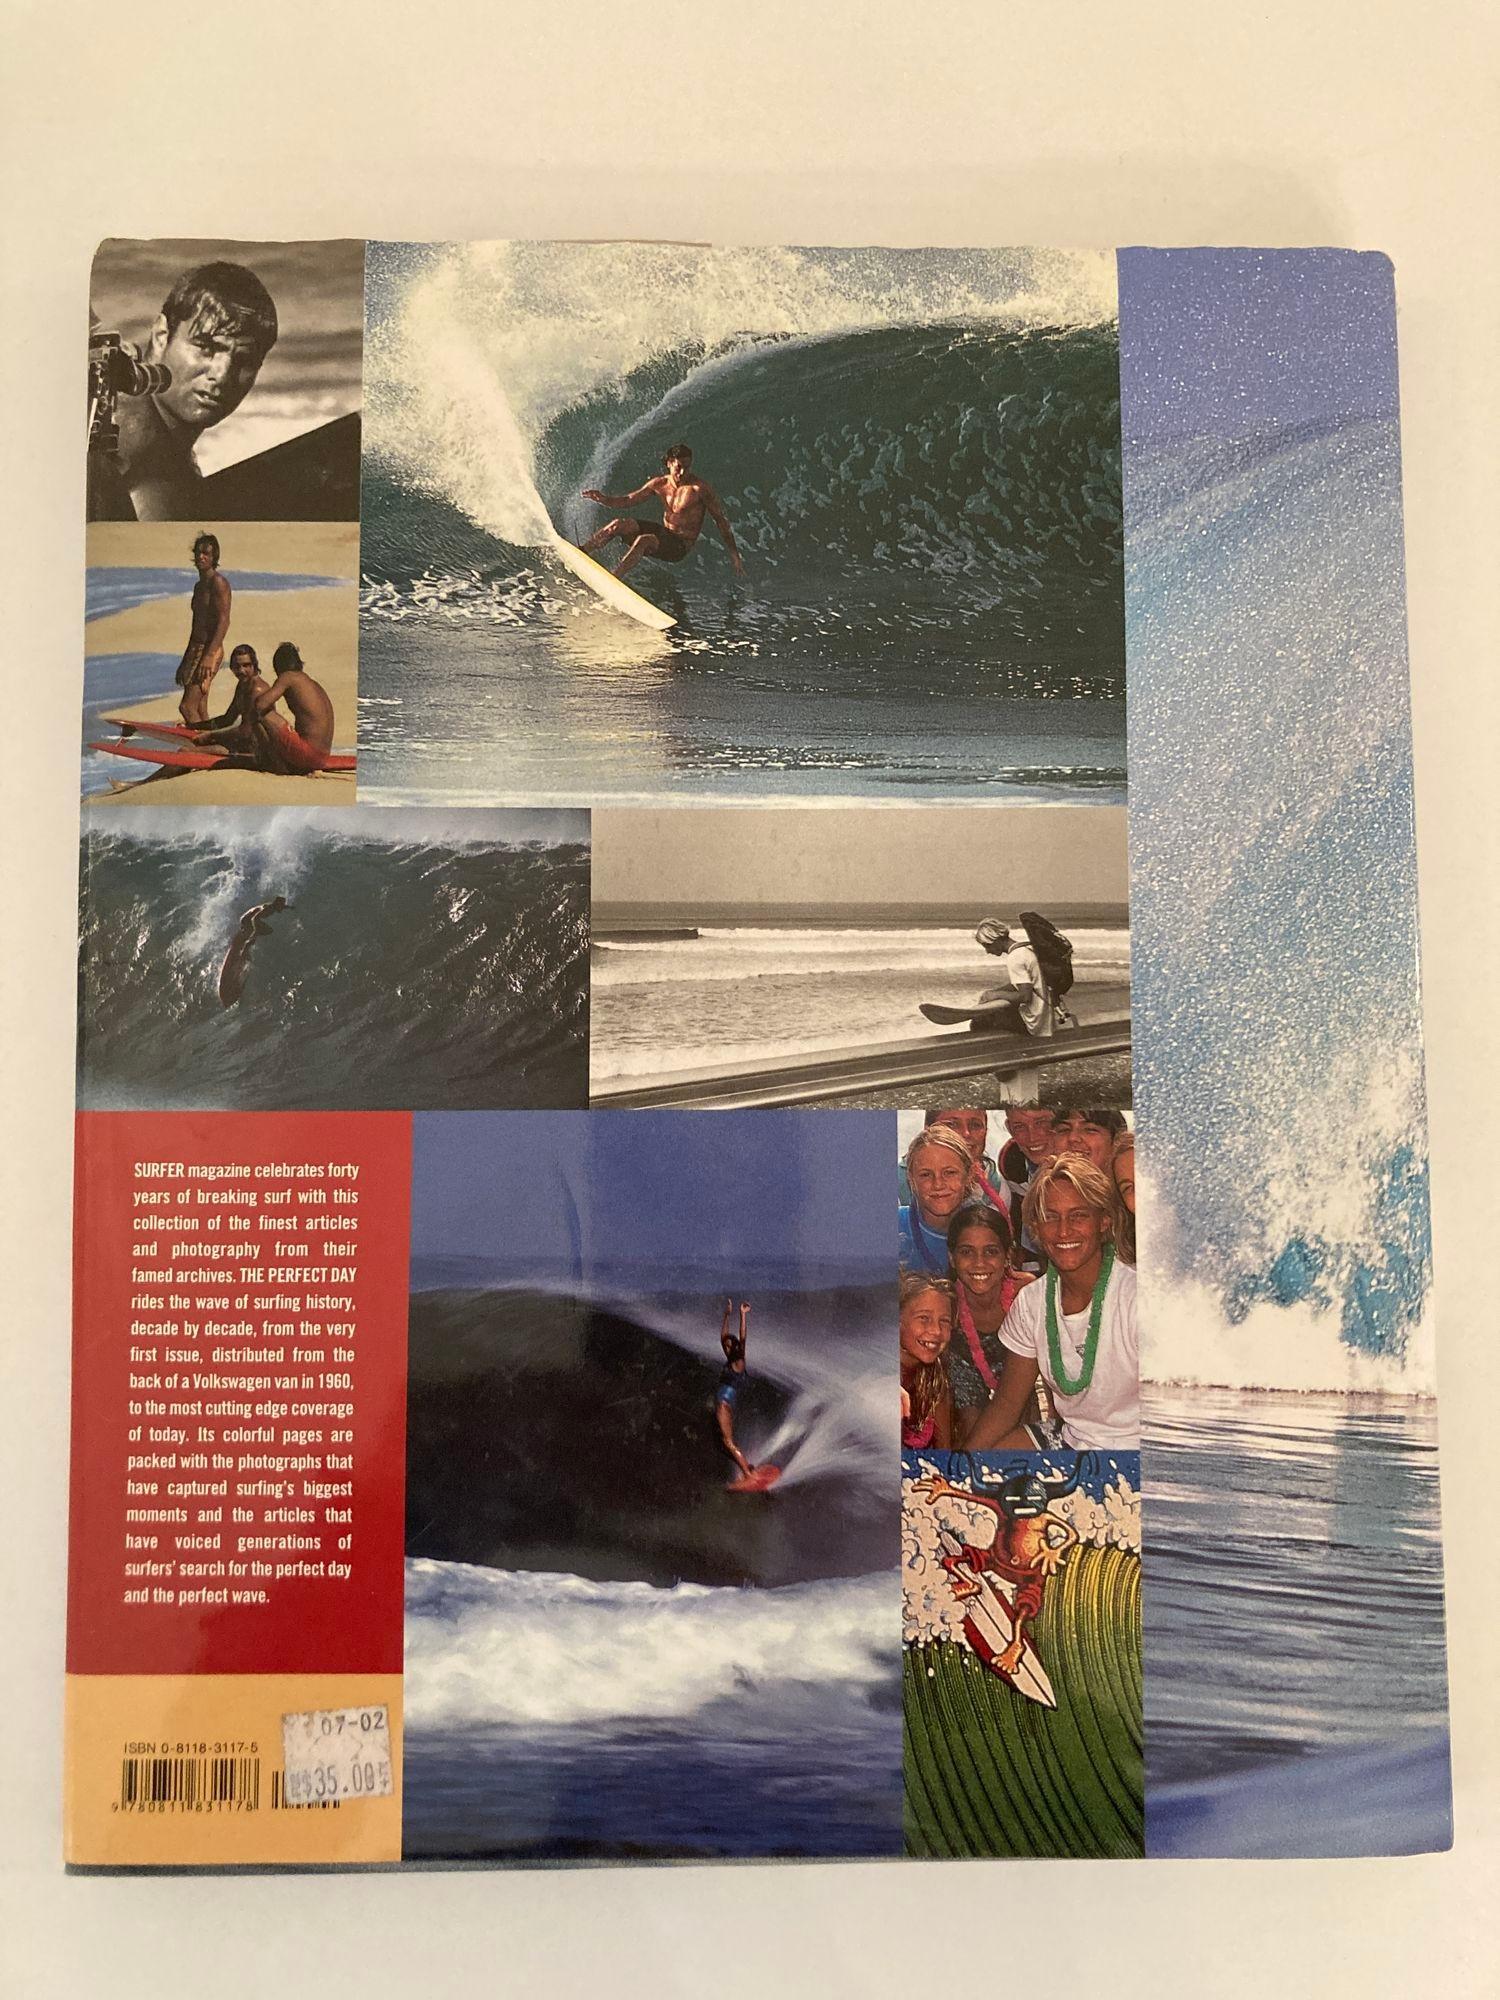 The Perfect Day: 40 Years of Surfer Magazine Hardcover Book
Title: The Perfect Day: 40 Years of Surfer Magazine
Publisher: Chronicle Books
Publication Date: 2001
Binding: Hardcover
Book Condition: Good
Synopsis:
